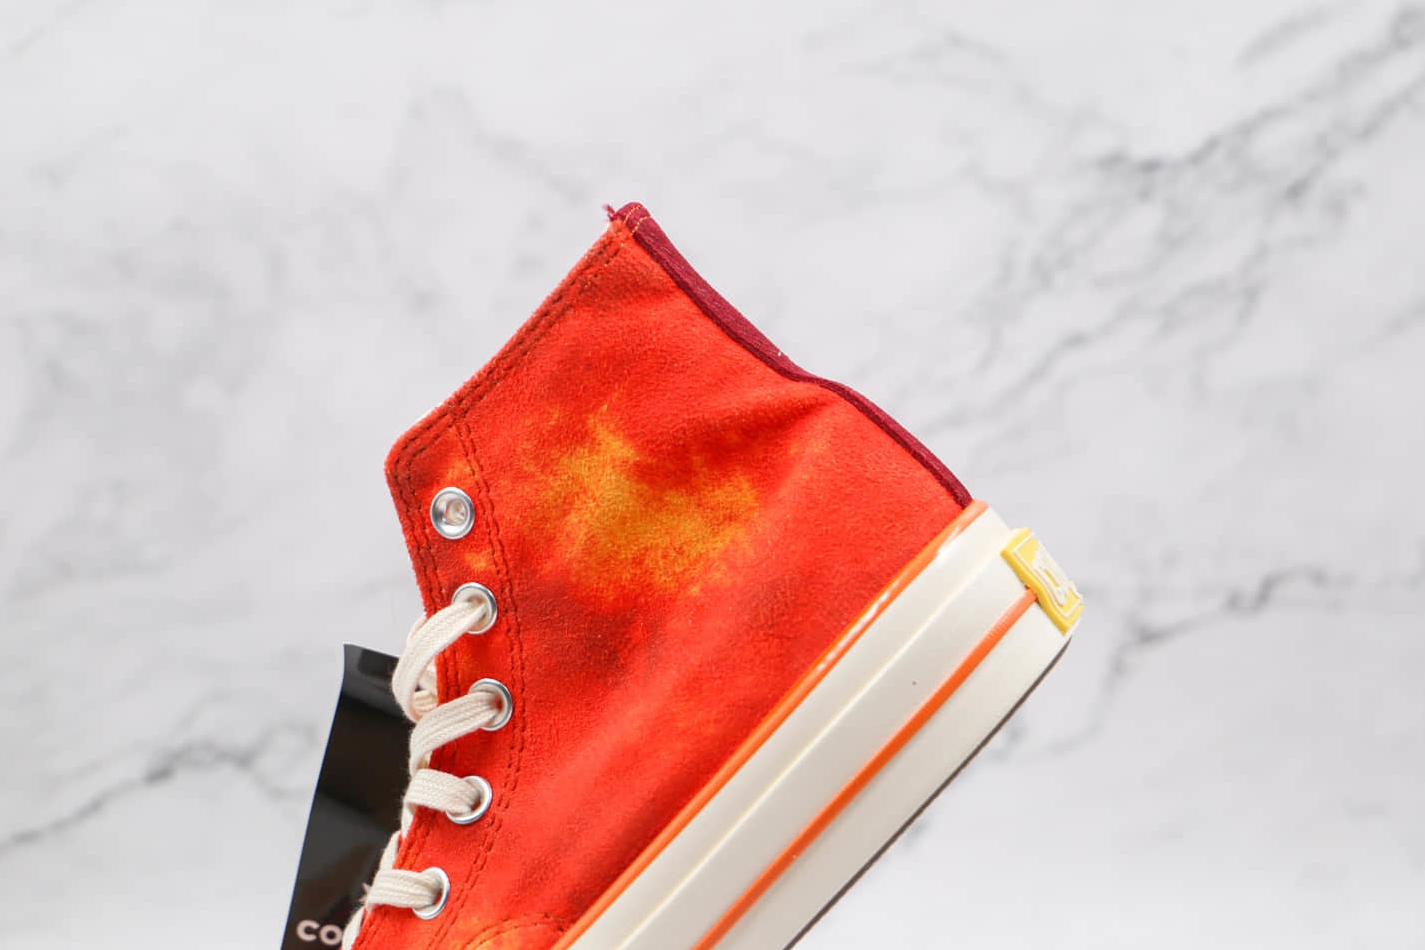 Converse Concepts x Chuck 70 High 'Southern Flame' 170590C - Limited Edition Collaboration